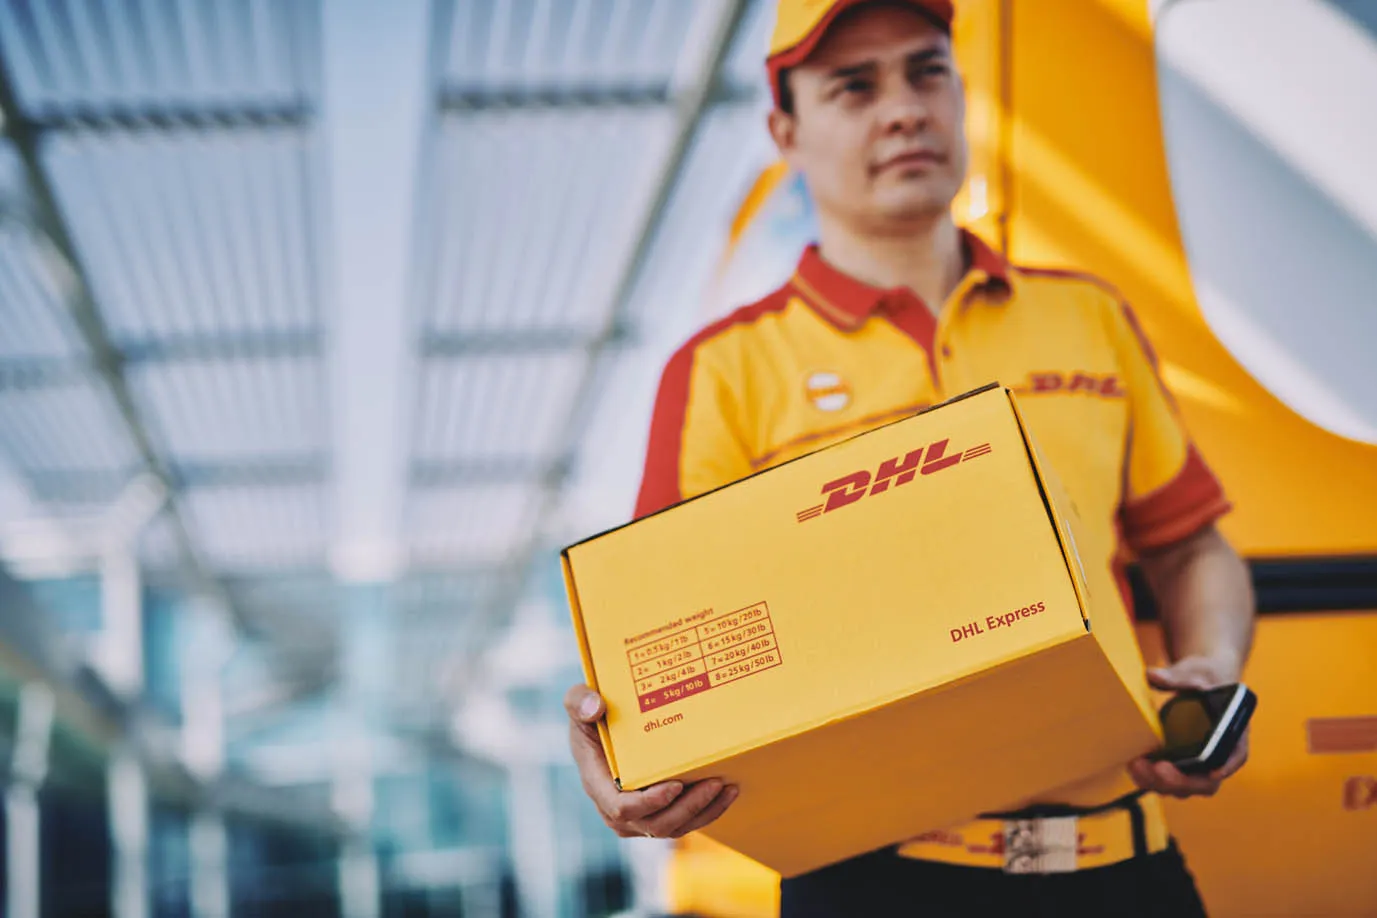 Dhl Shipment on Hold